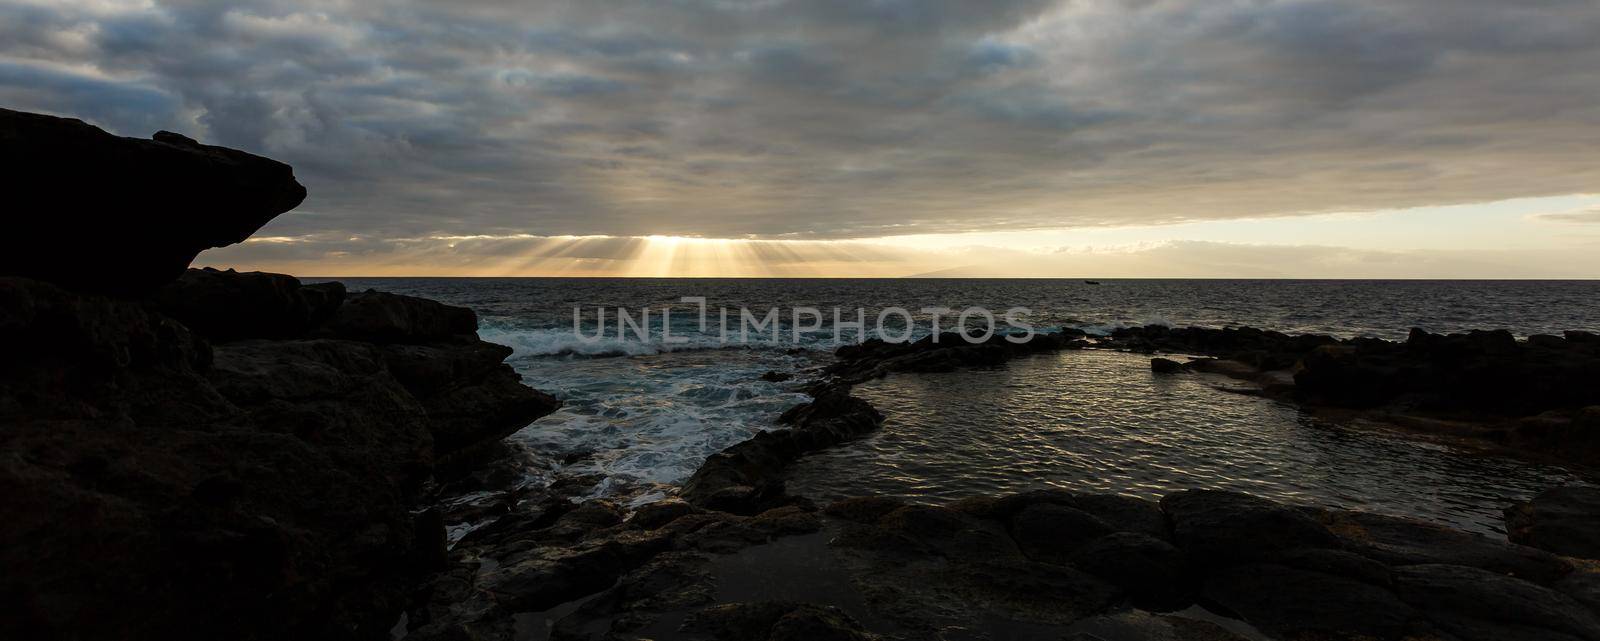 On shore of the Atlantic Ocean on the island Tenerife by Andelov13